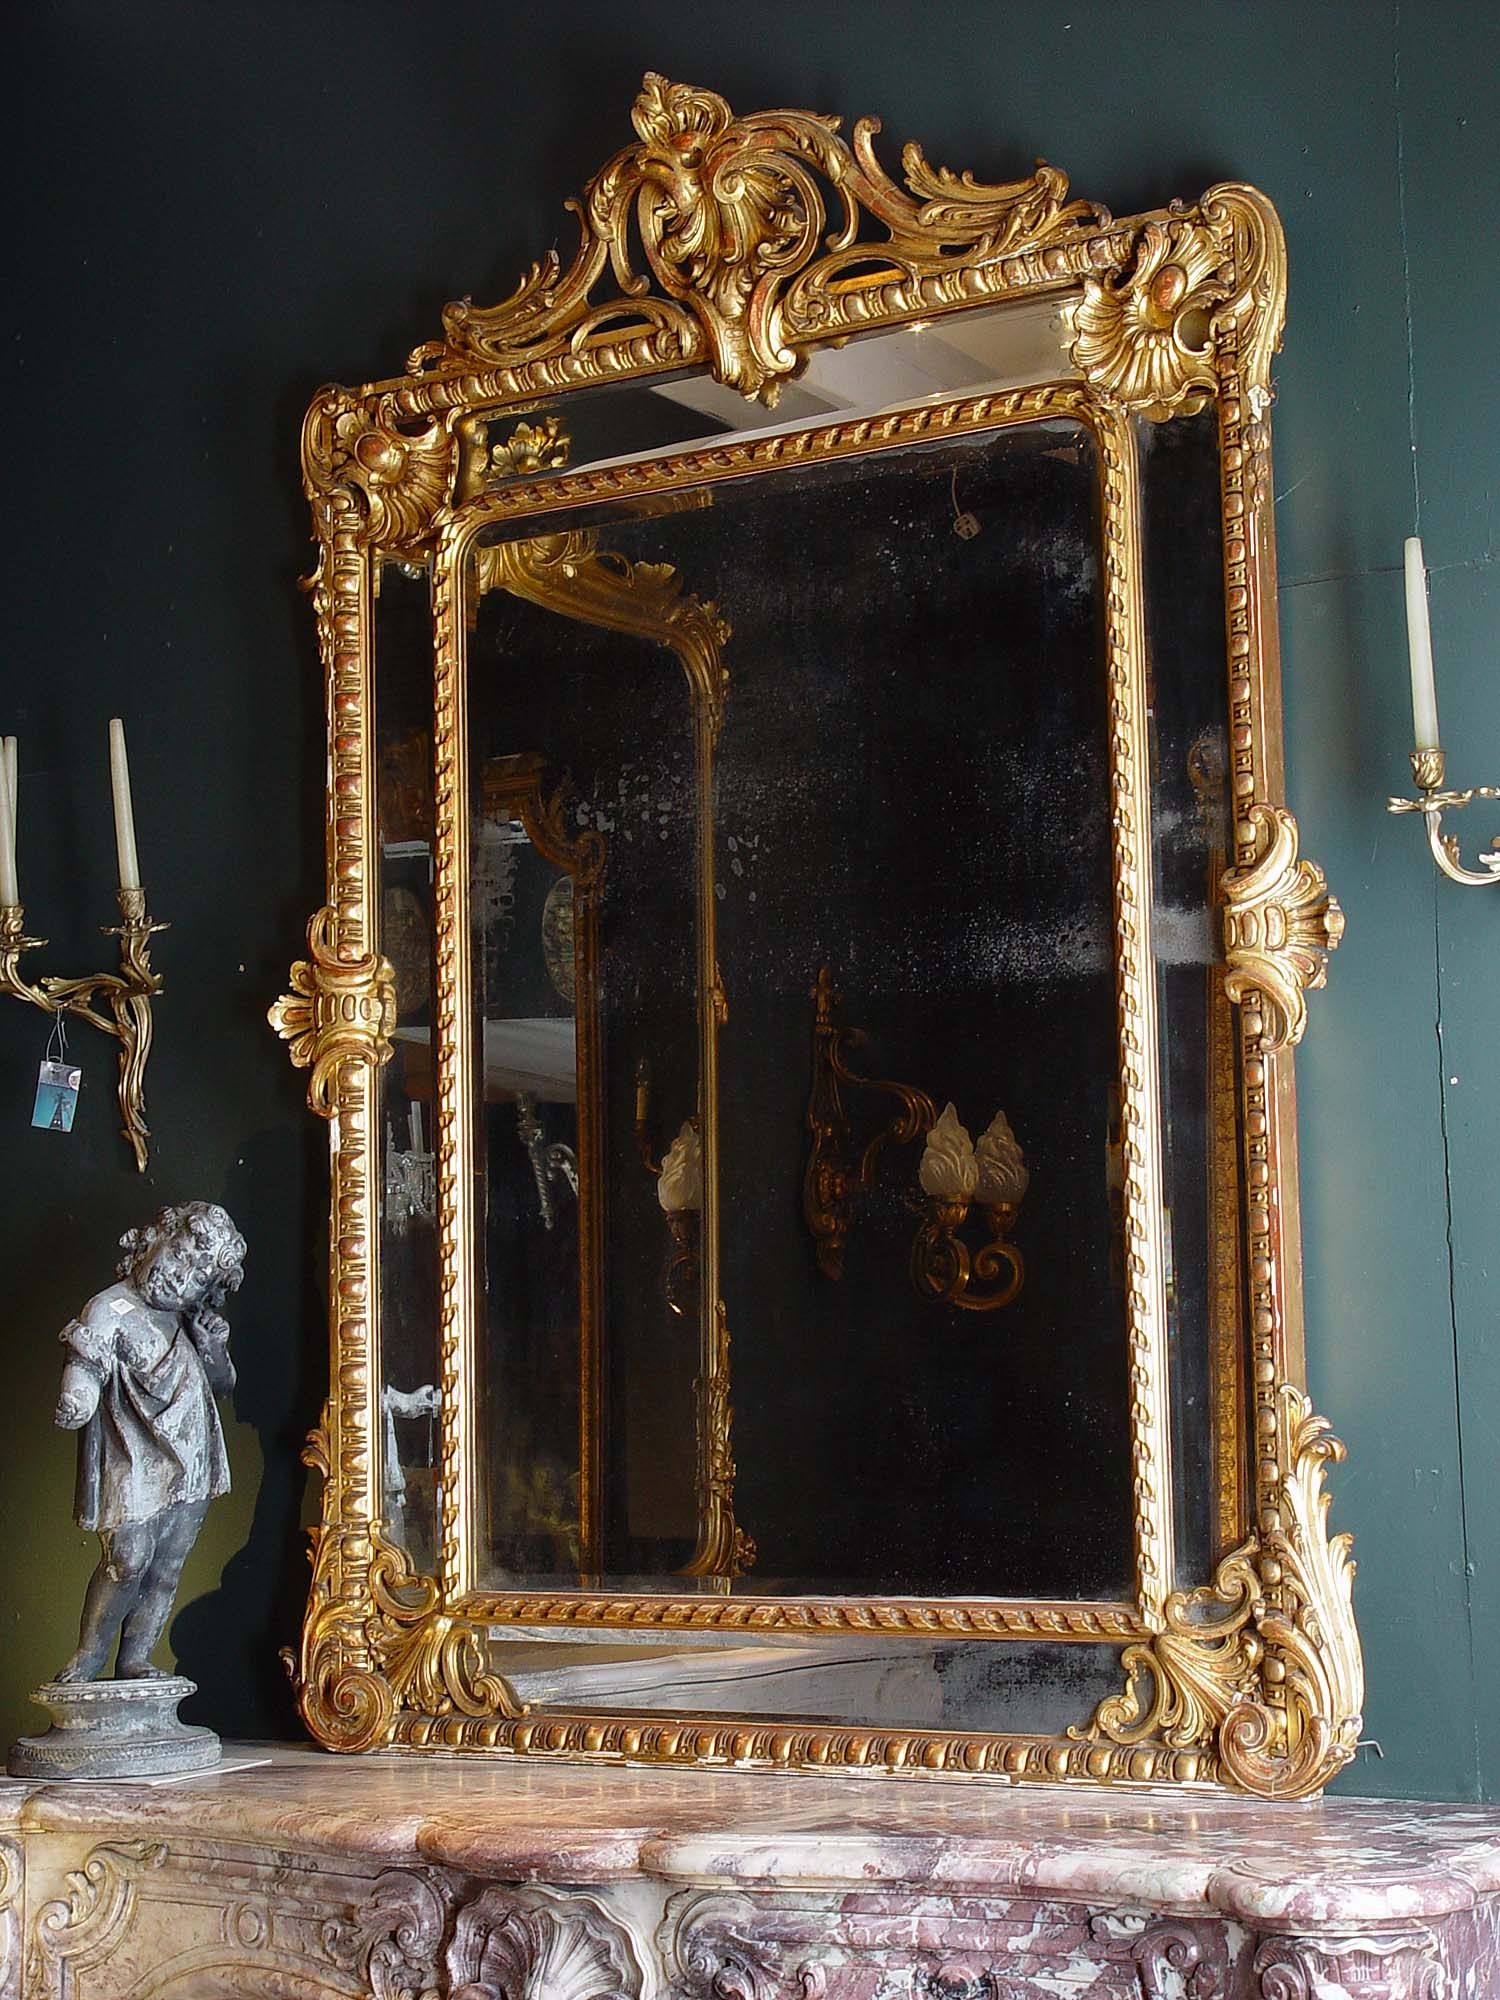 Big Mirrors For Sale 38 Cool Ideas For Mirror Harpsoundsco For Victorian Mirrors For Sale (View 5 of 15)